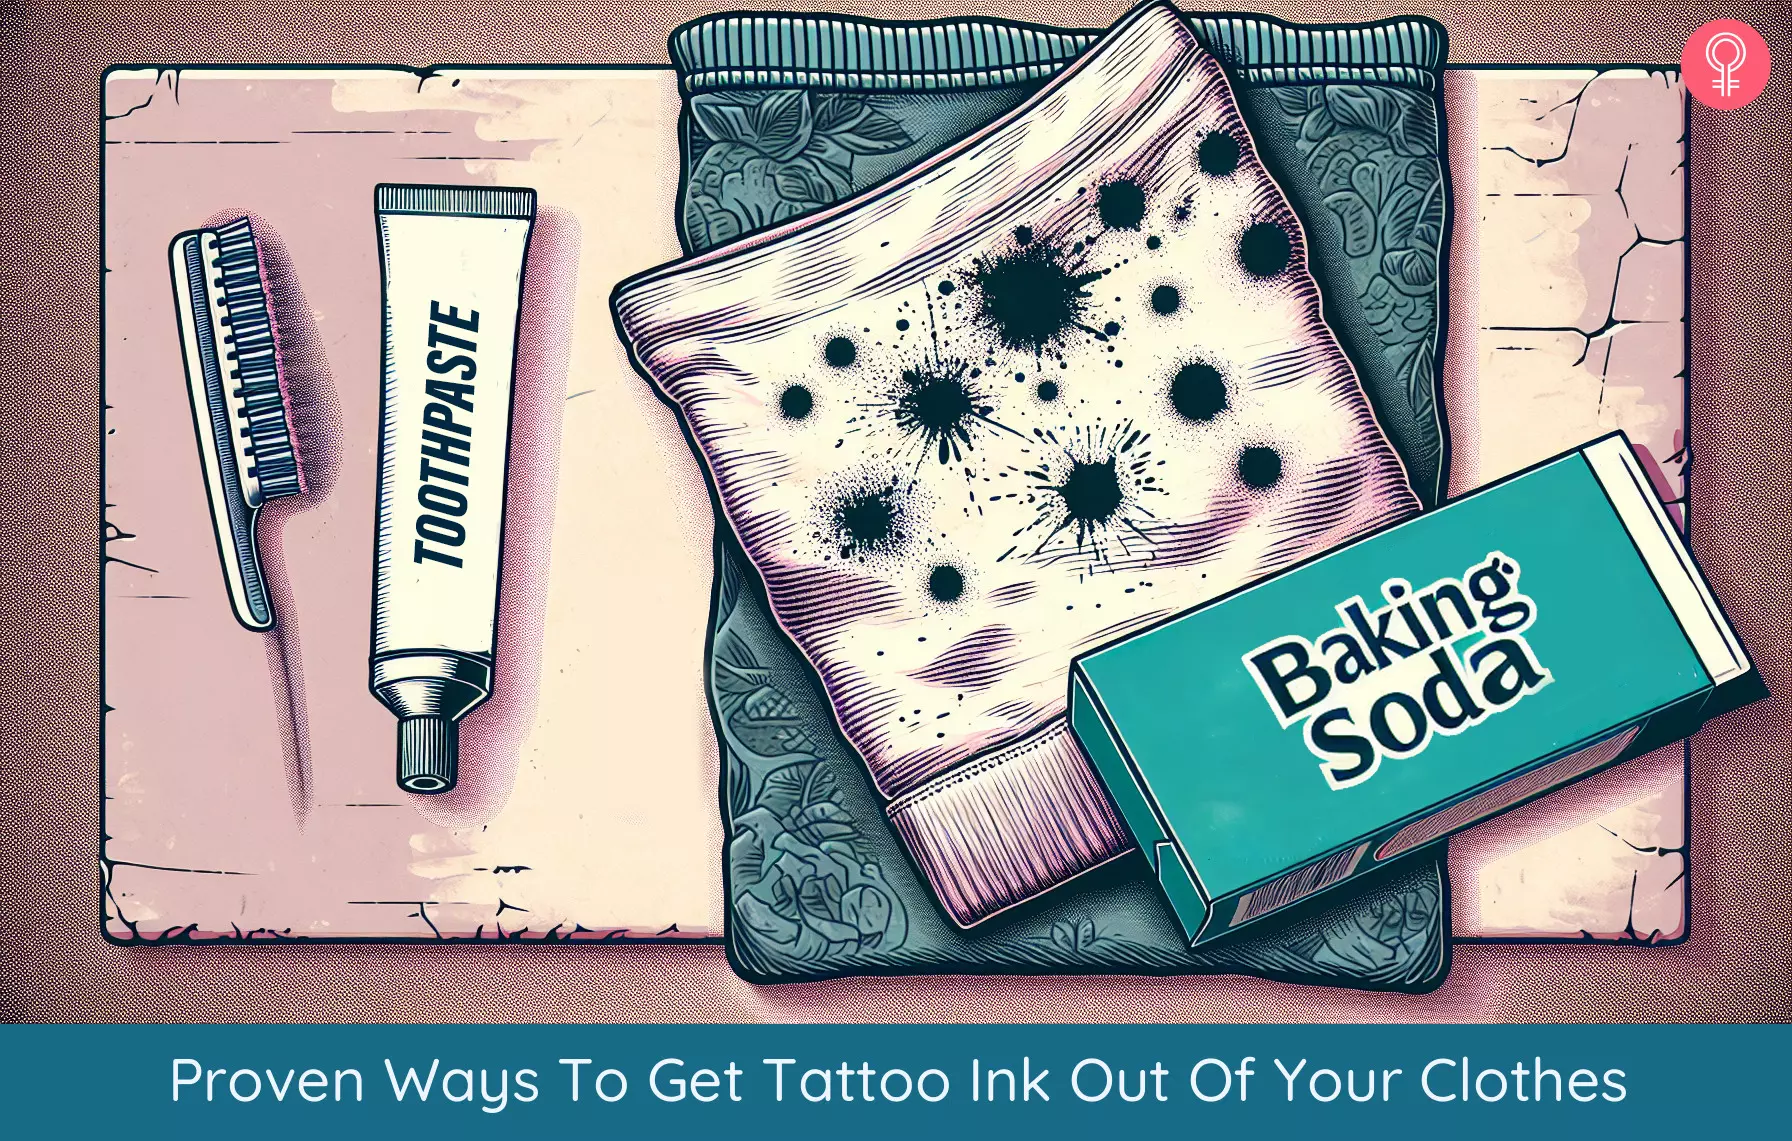 10 Proven Ways To Get Tattoo Ink Out Of Your Clothes